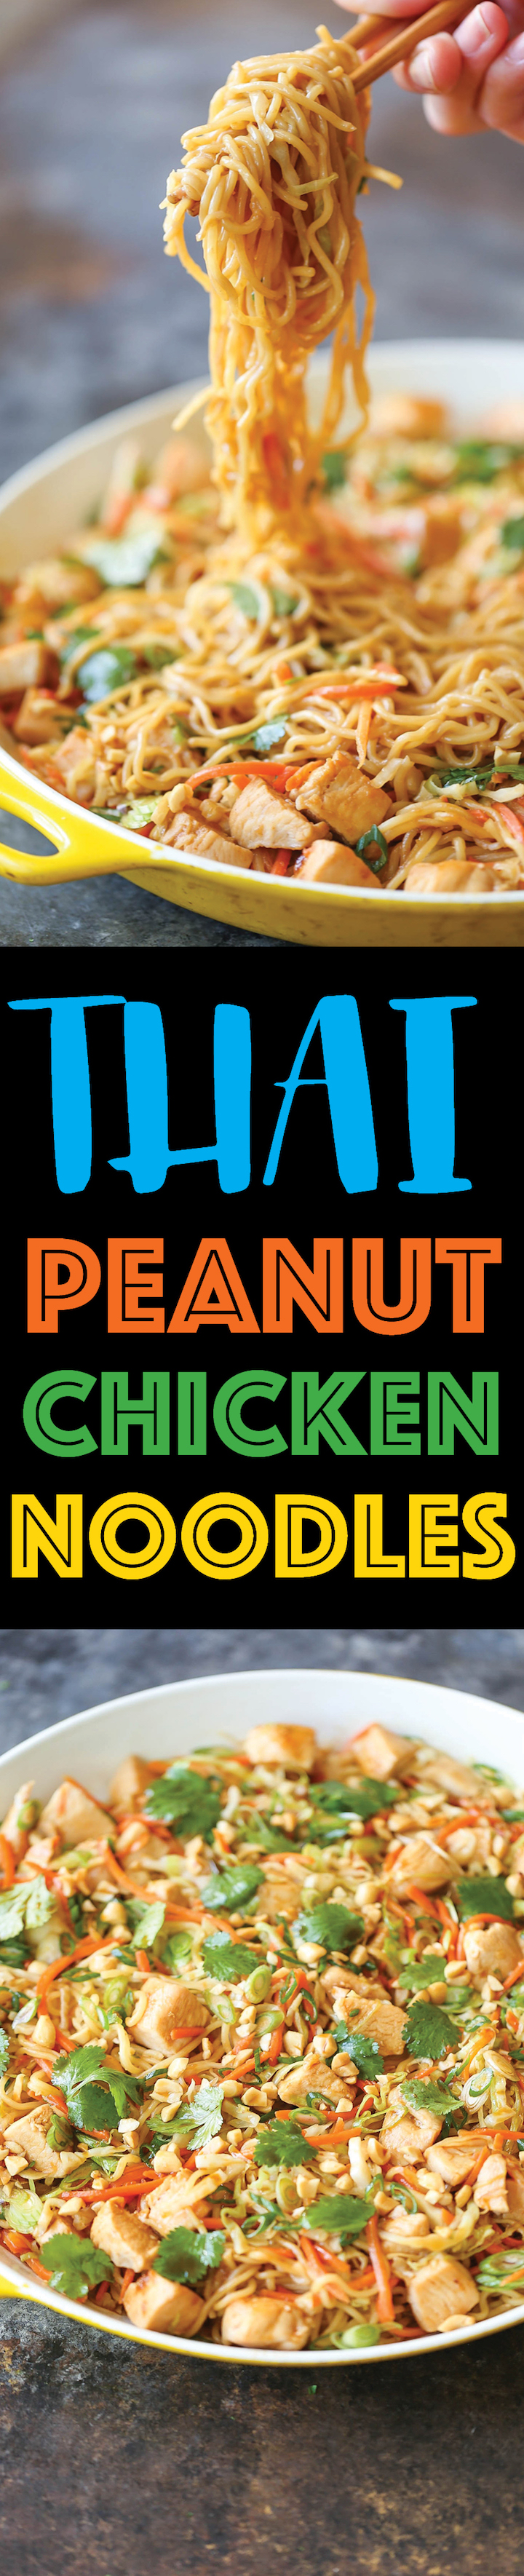 Peanut Noodles With Chicken